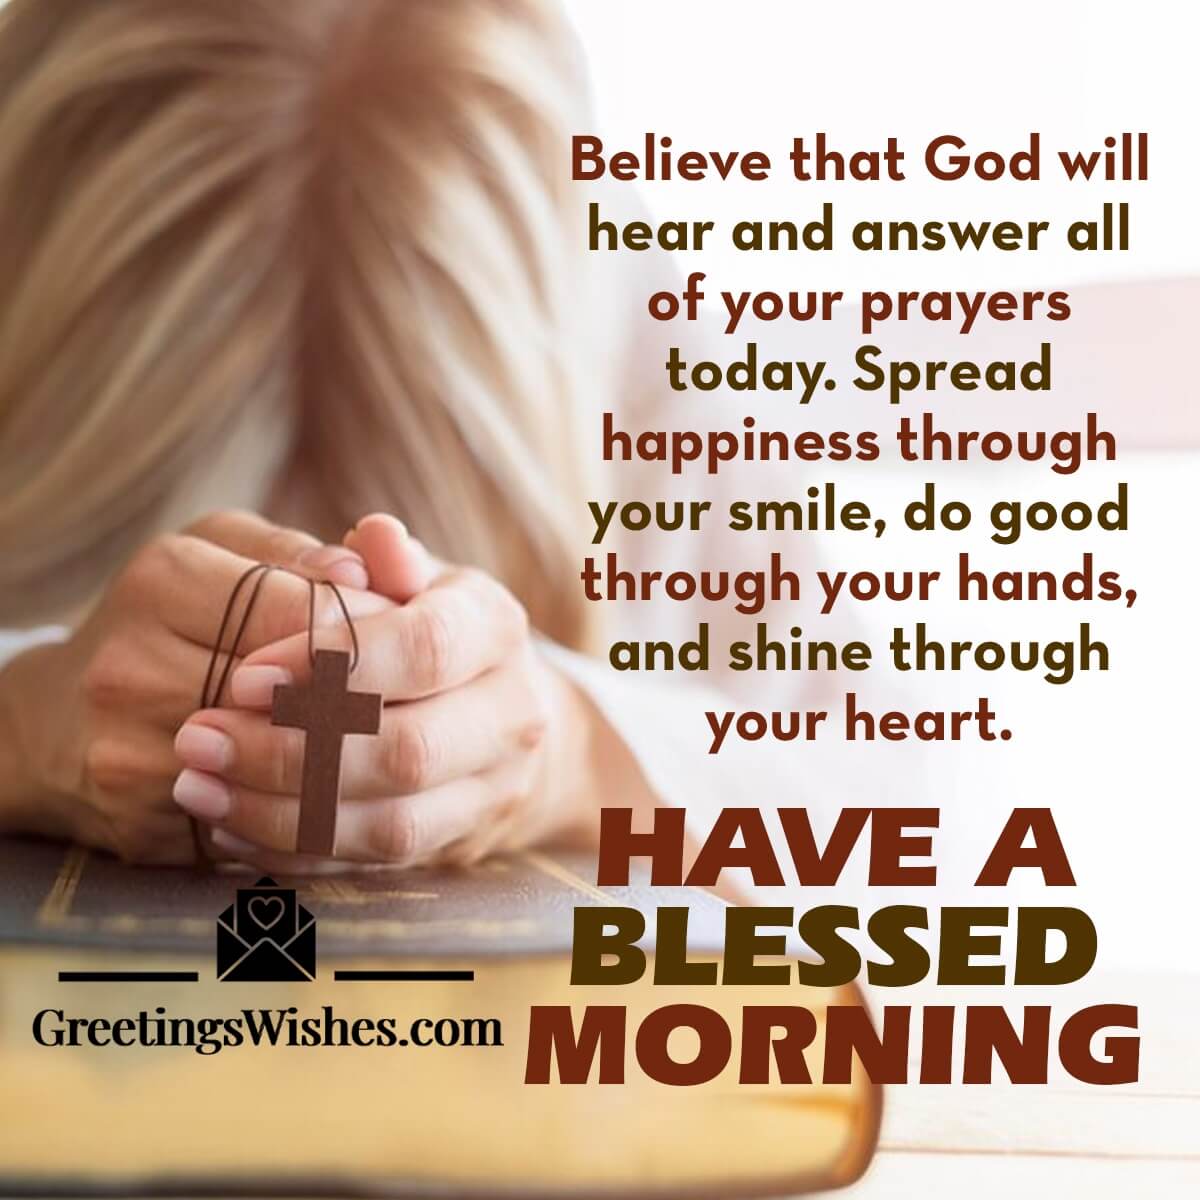 Good Morning Prayer Messages - Greetings Wishes